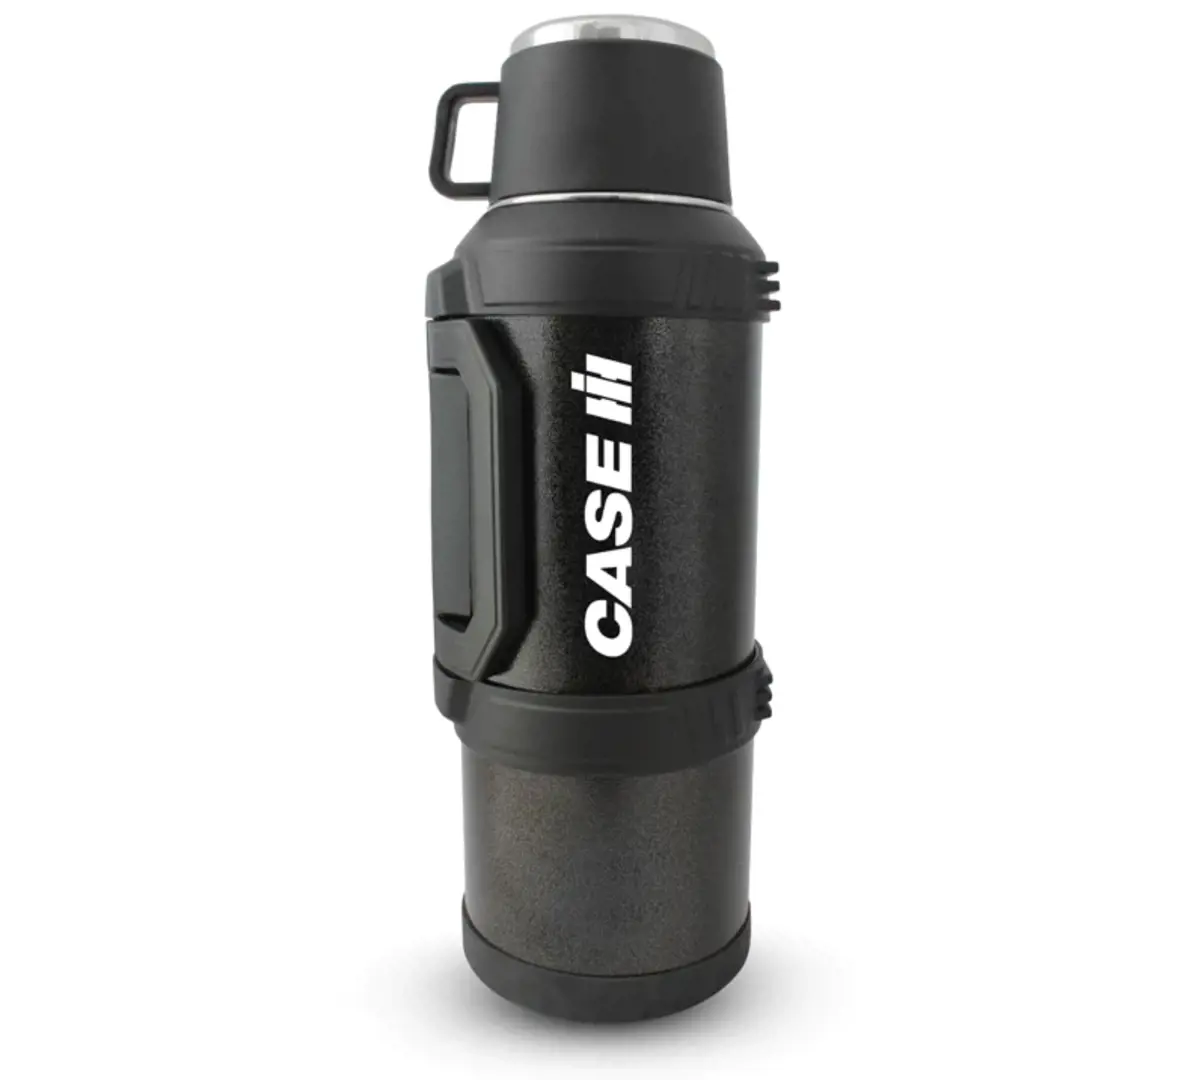 Image 1 for #IH09-4548 The BEAST Case IH 3.6 Liter Water Bottle